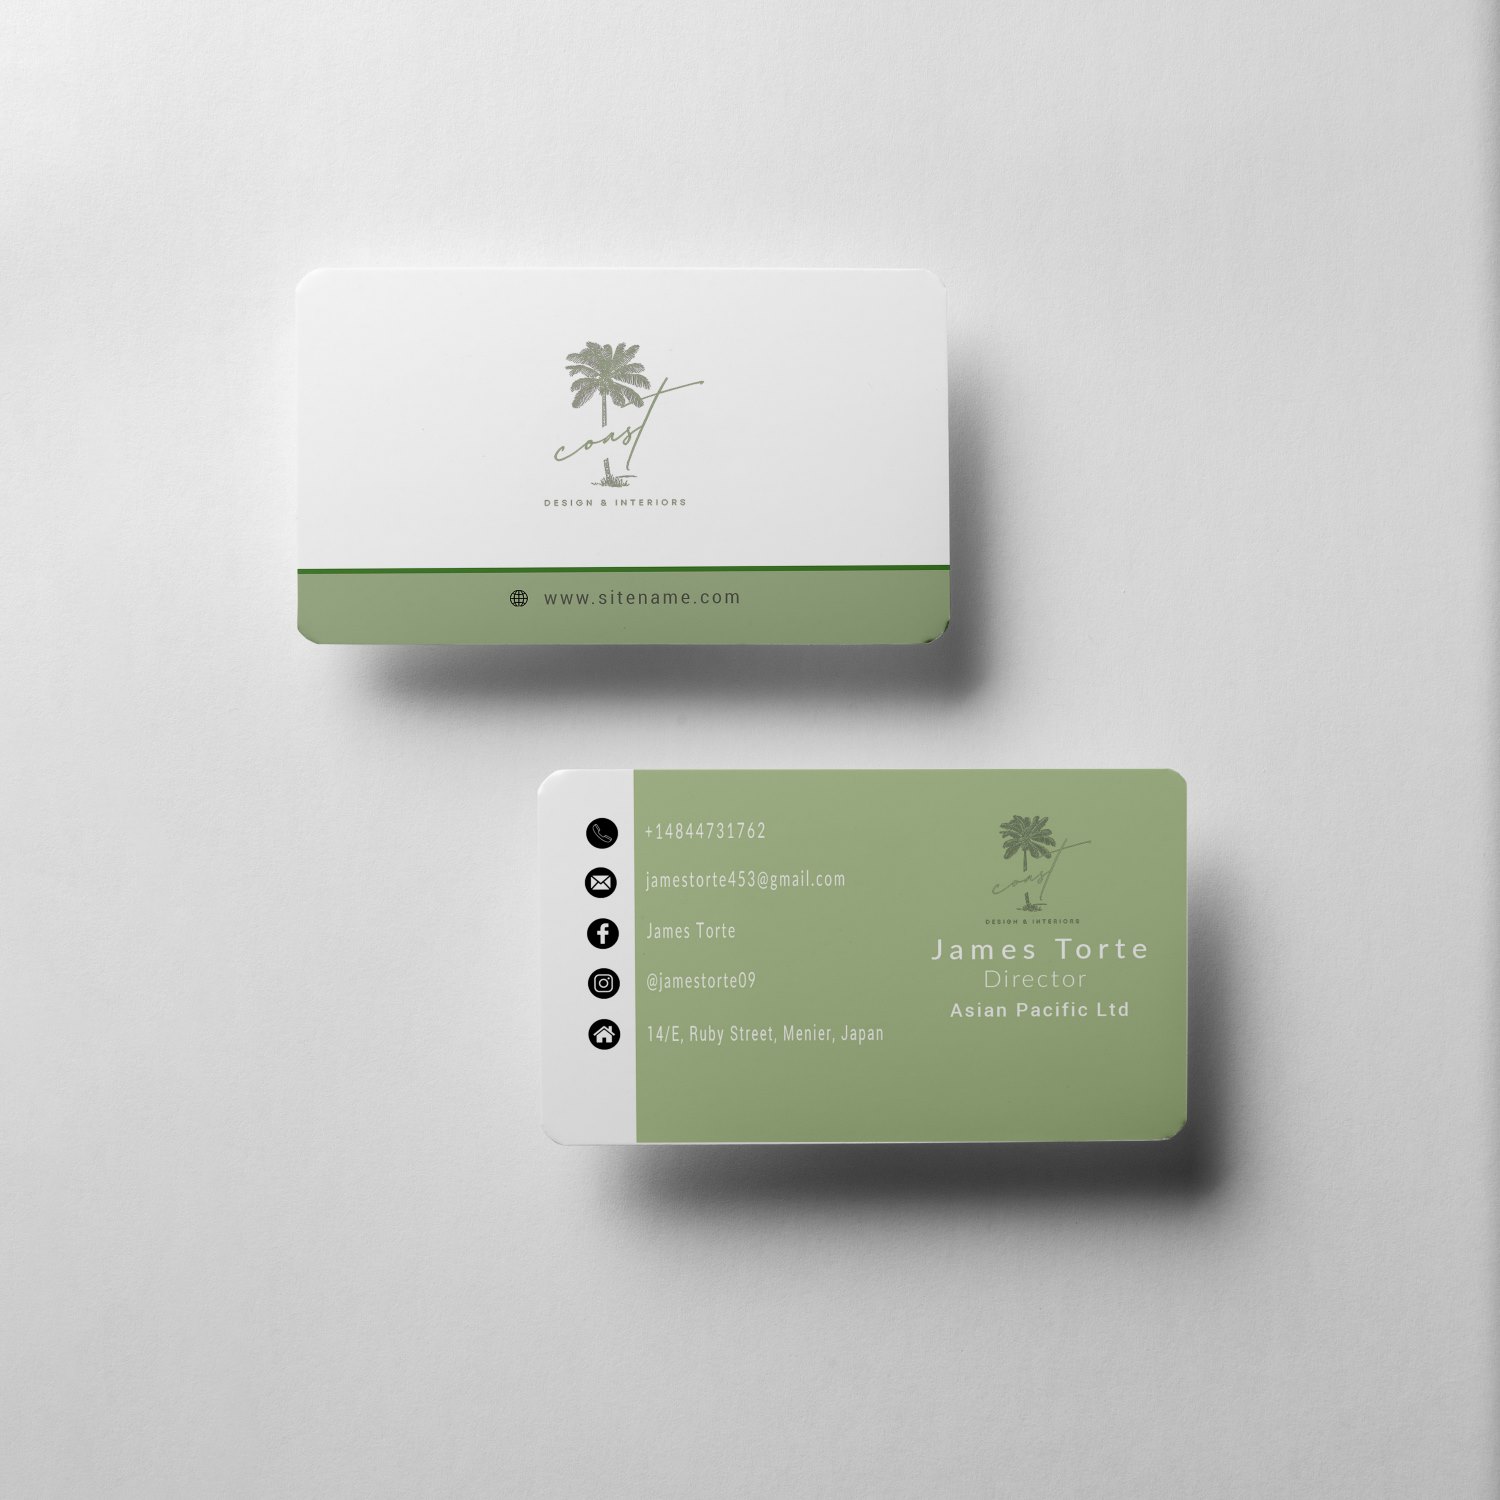 I will create stunning custom business card designs for your business